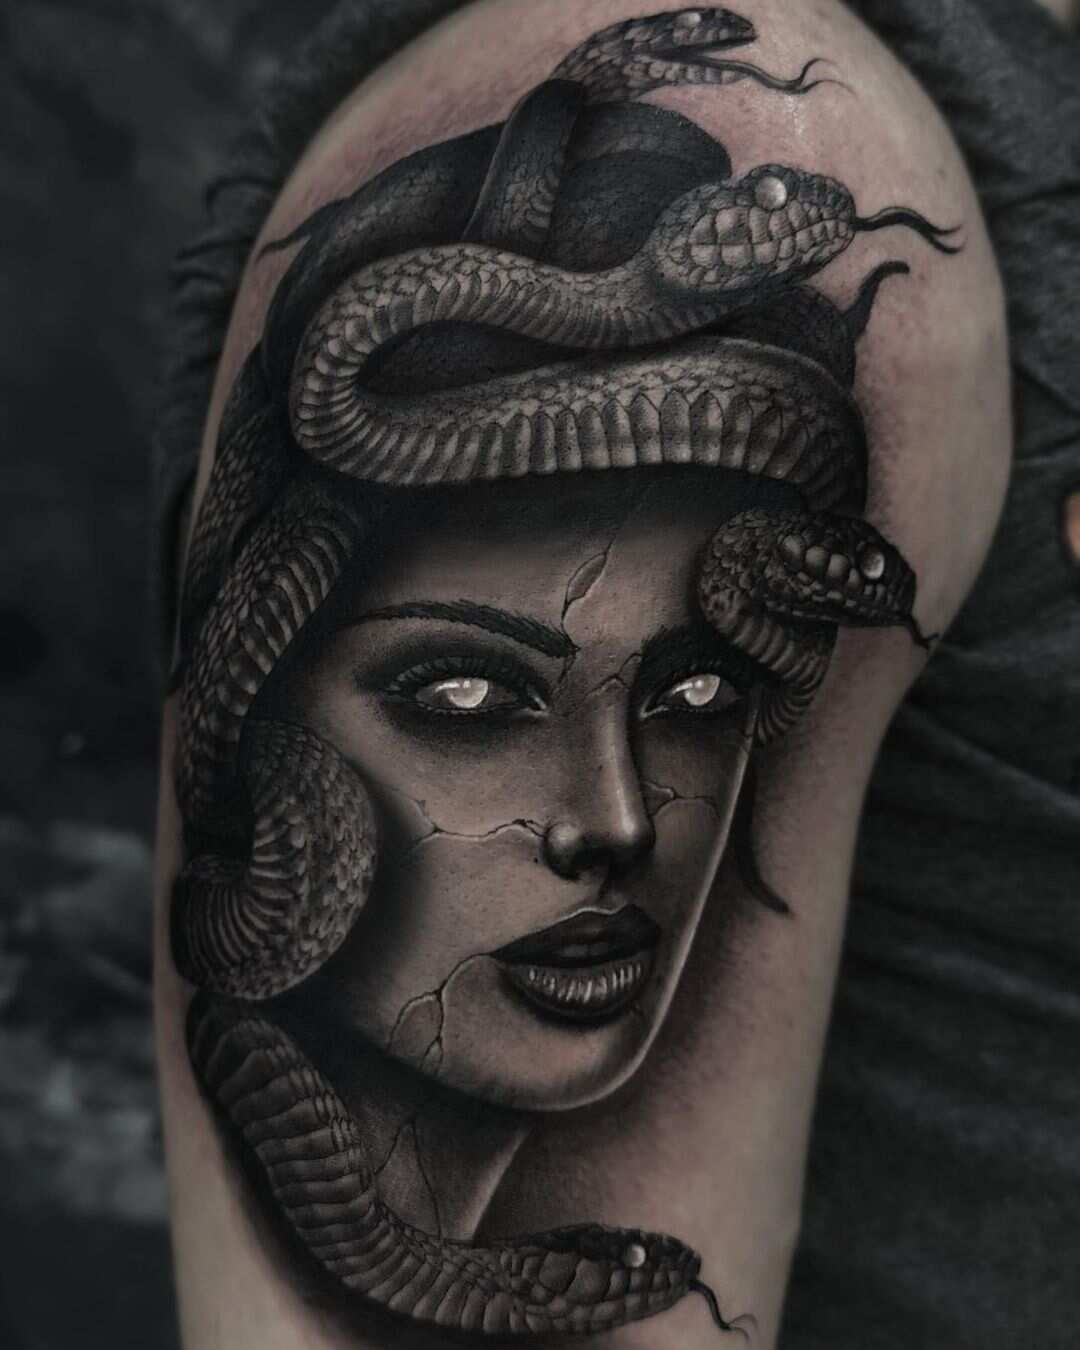 Loganthan Deenadhayalan on Instagram The Medusa tattoo can mean many  things but its generally a symbol of survival strength and overcoming  assault 𝙈𝙞𝙘𝙧𝙤 𝙍𝙚𝙖𝙡𝙞𝙨𝙩𝙞𝙘